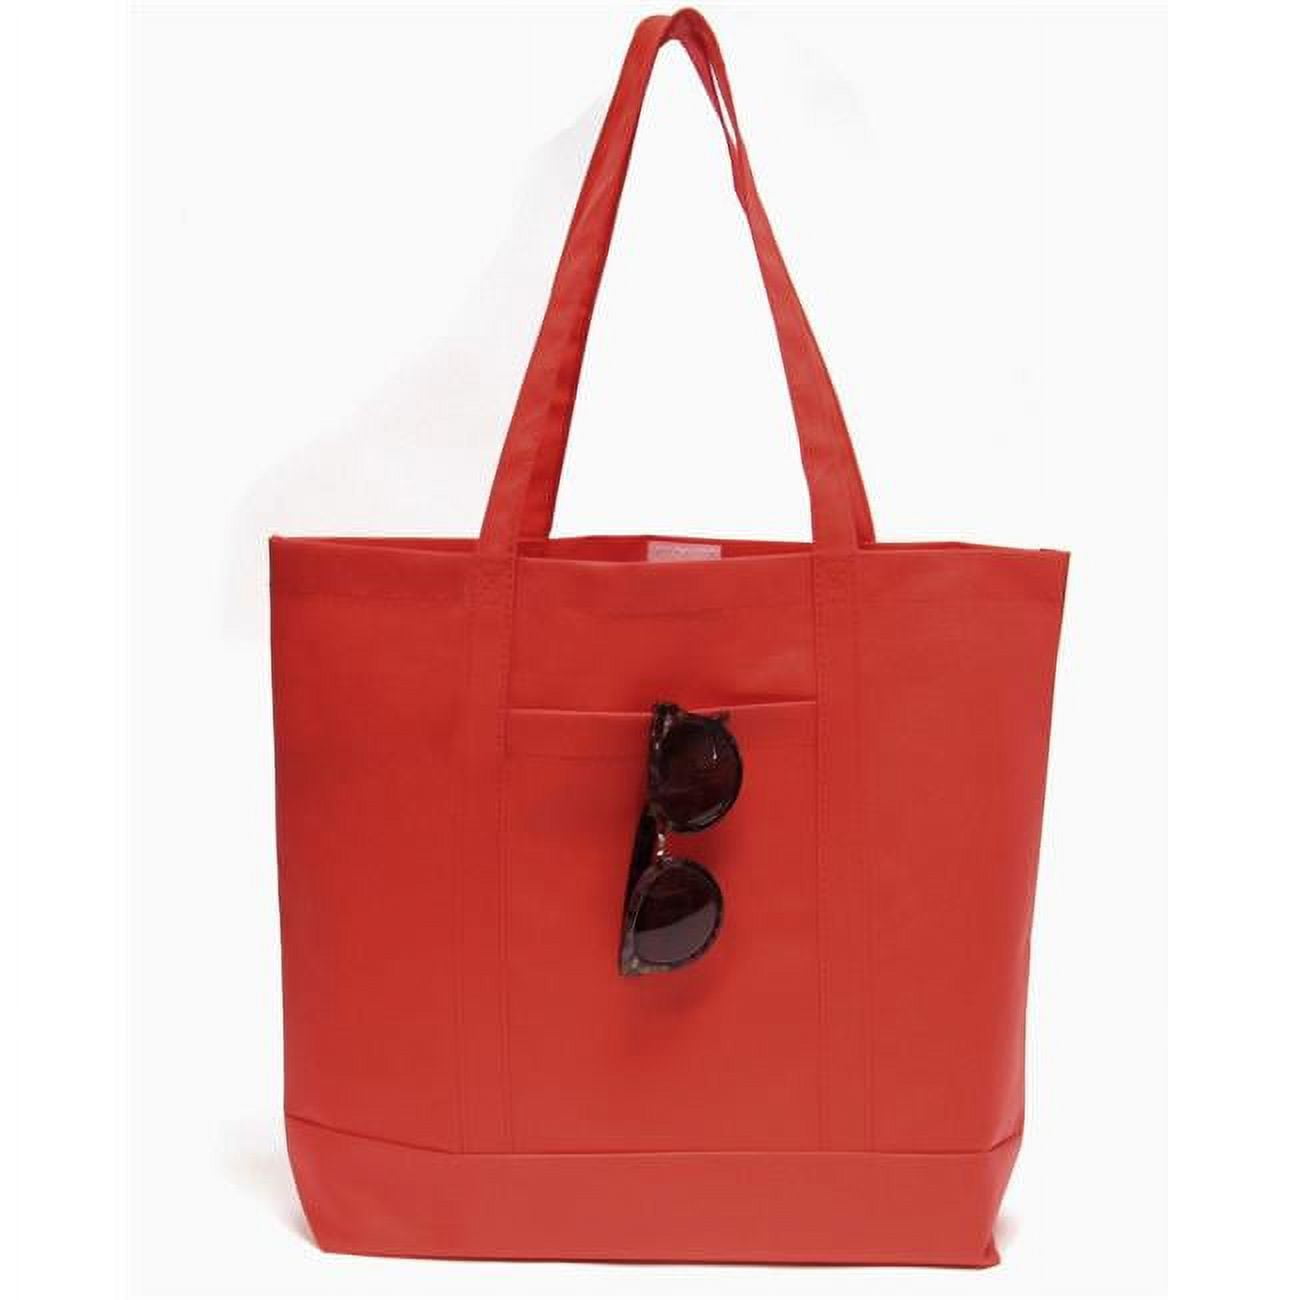 Nw301red Non Woven Tote With Pocket, Red - 10 Pack